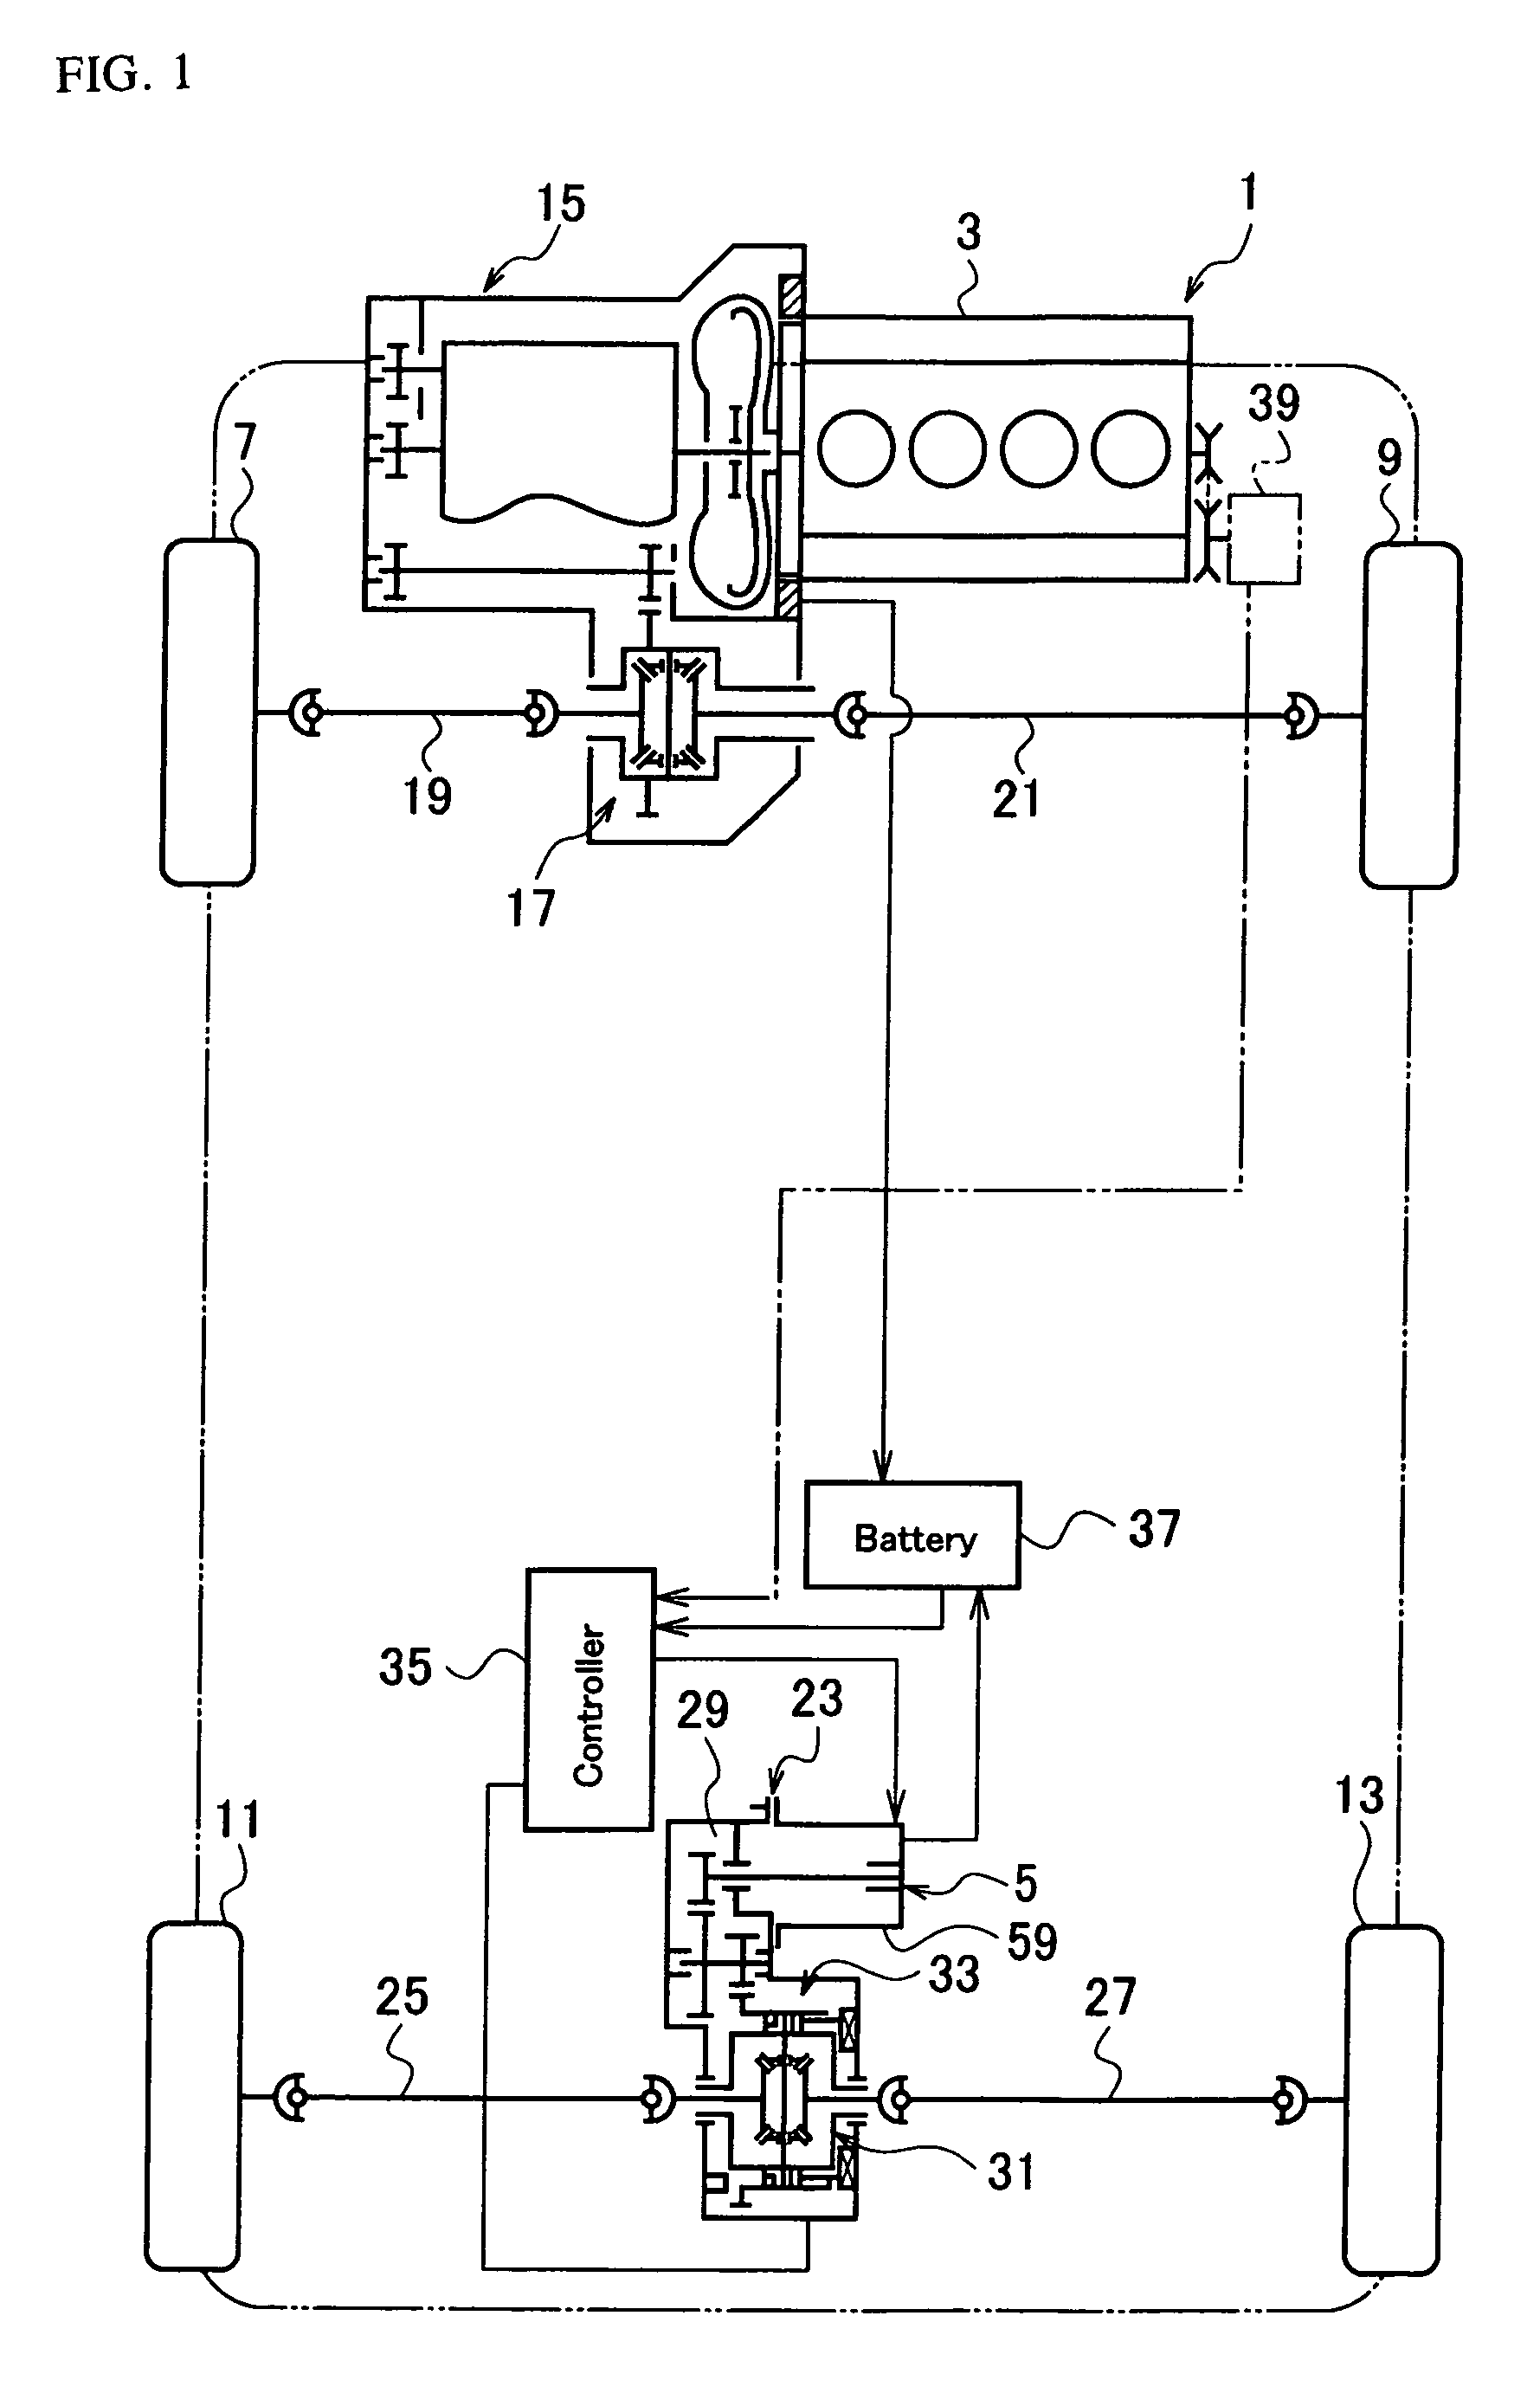 Reduction drive device